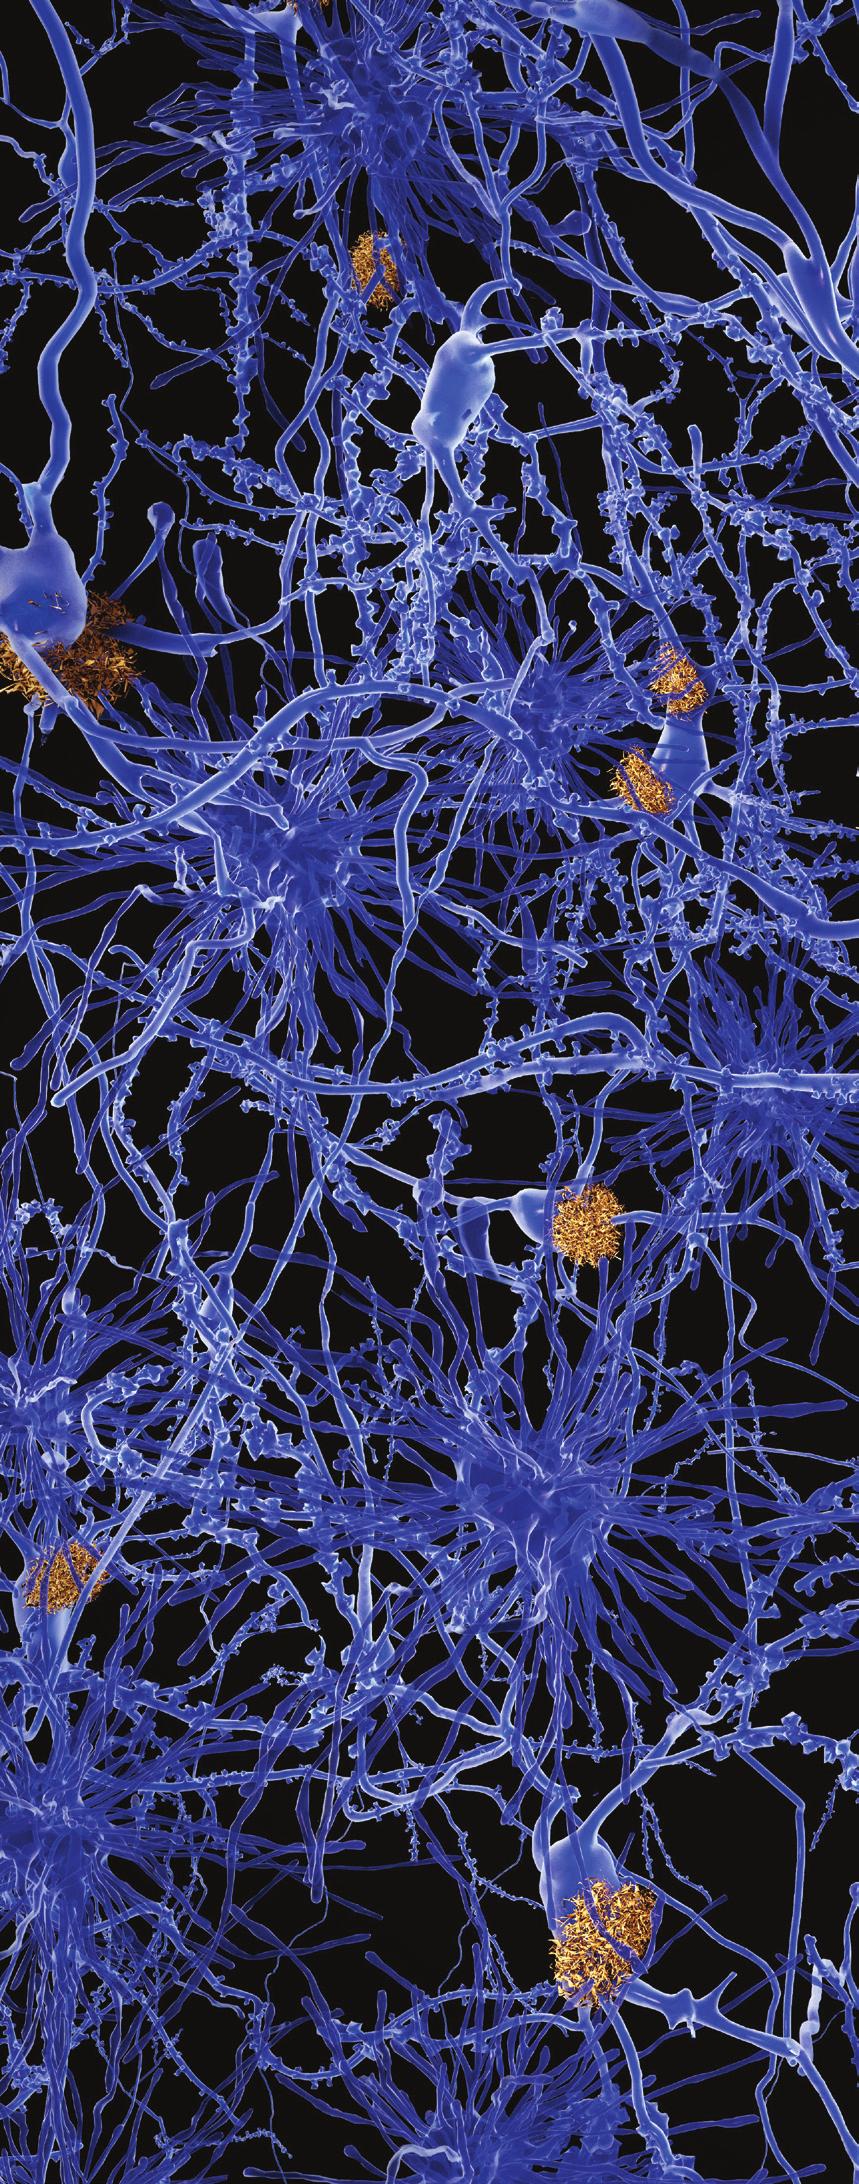 Join Us Alzheimer s disease: neuron network with amyloid plaques At Stanford Medicine, we are getting closer every day to building a complete picture of Alzheimer s disease and other forms of